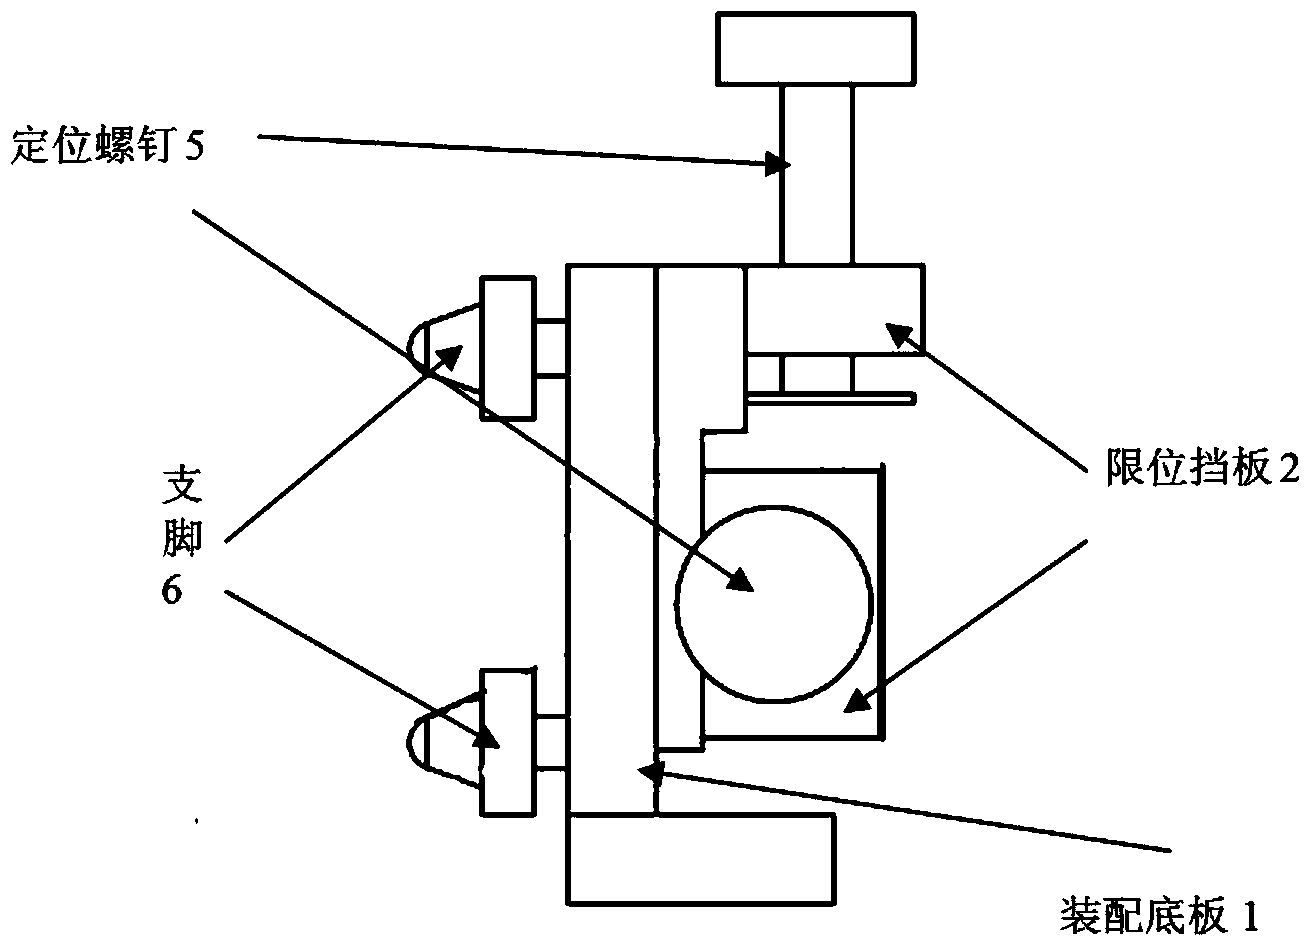 Magnetic separation-state cesium-beam tube state-selection magnet component assembly system and assembly detection method